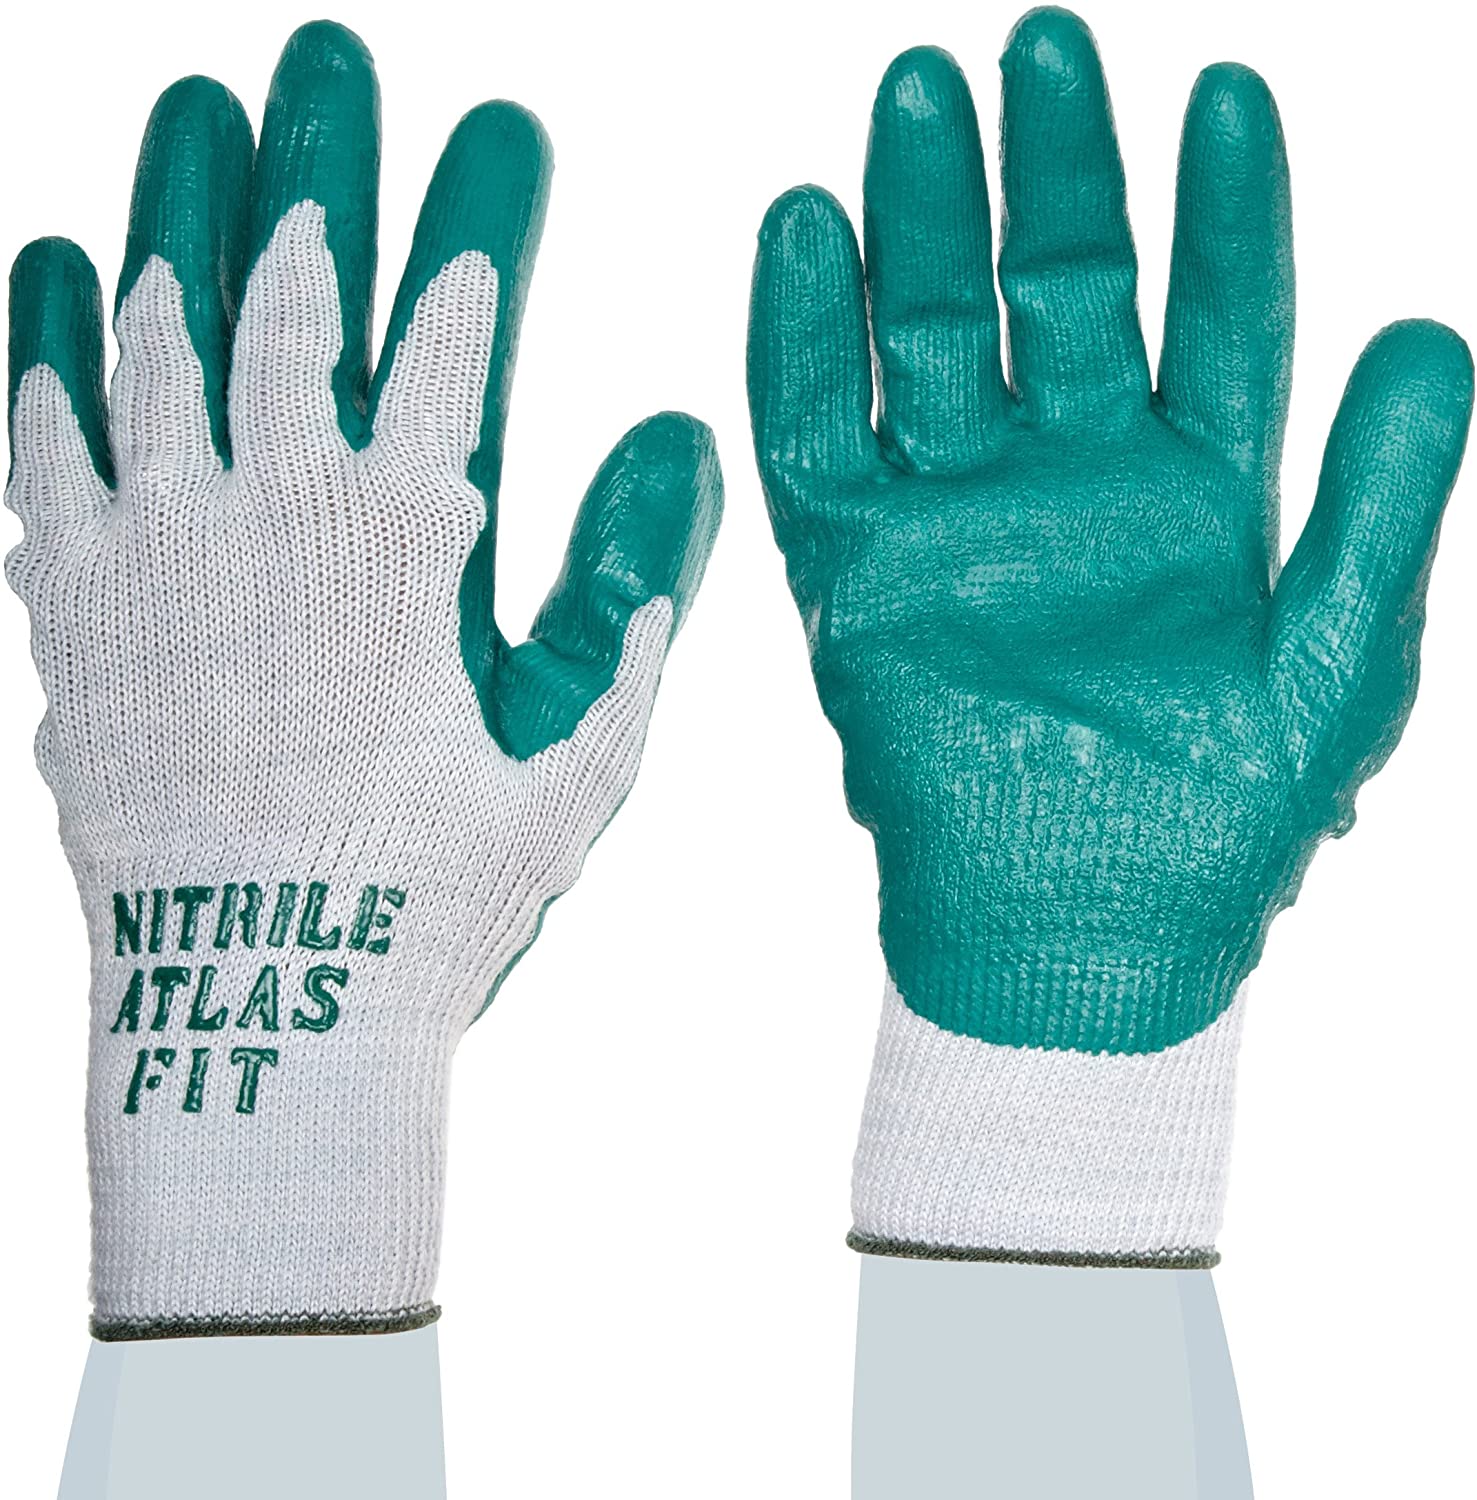 Atlas Fit Grip Palm Coated Nitrile Glove